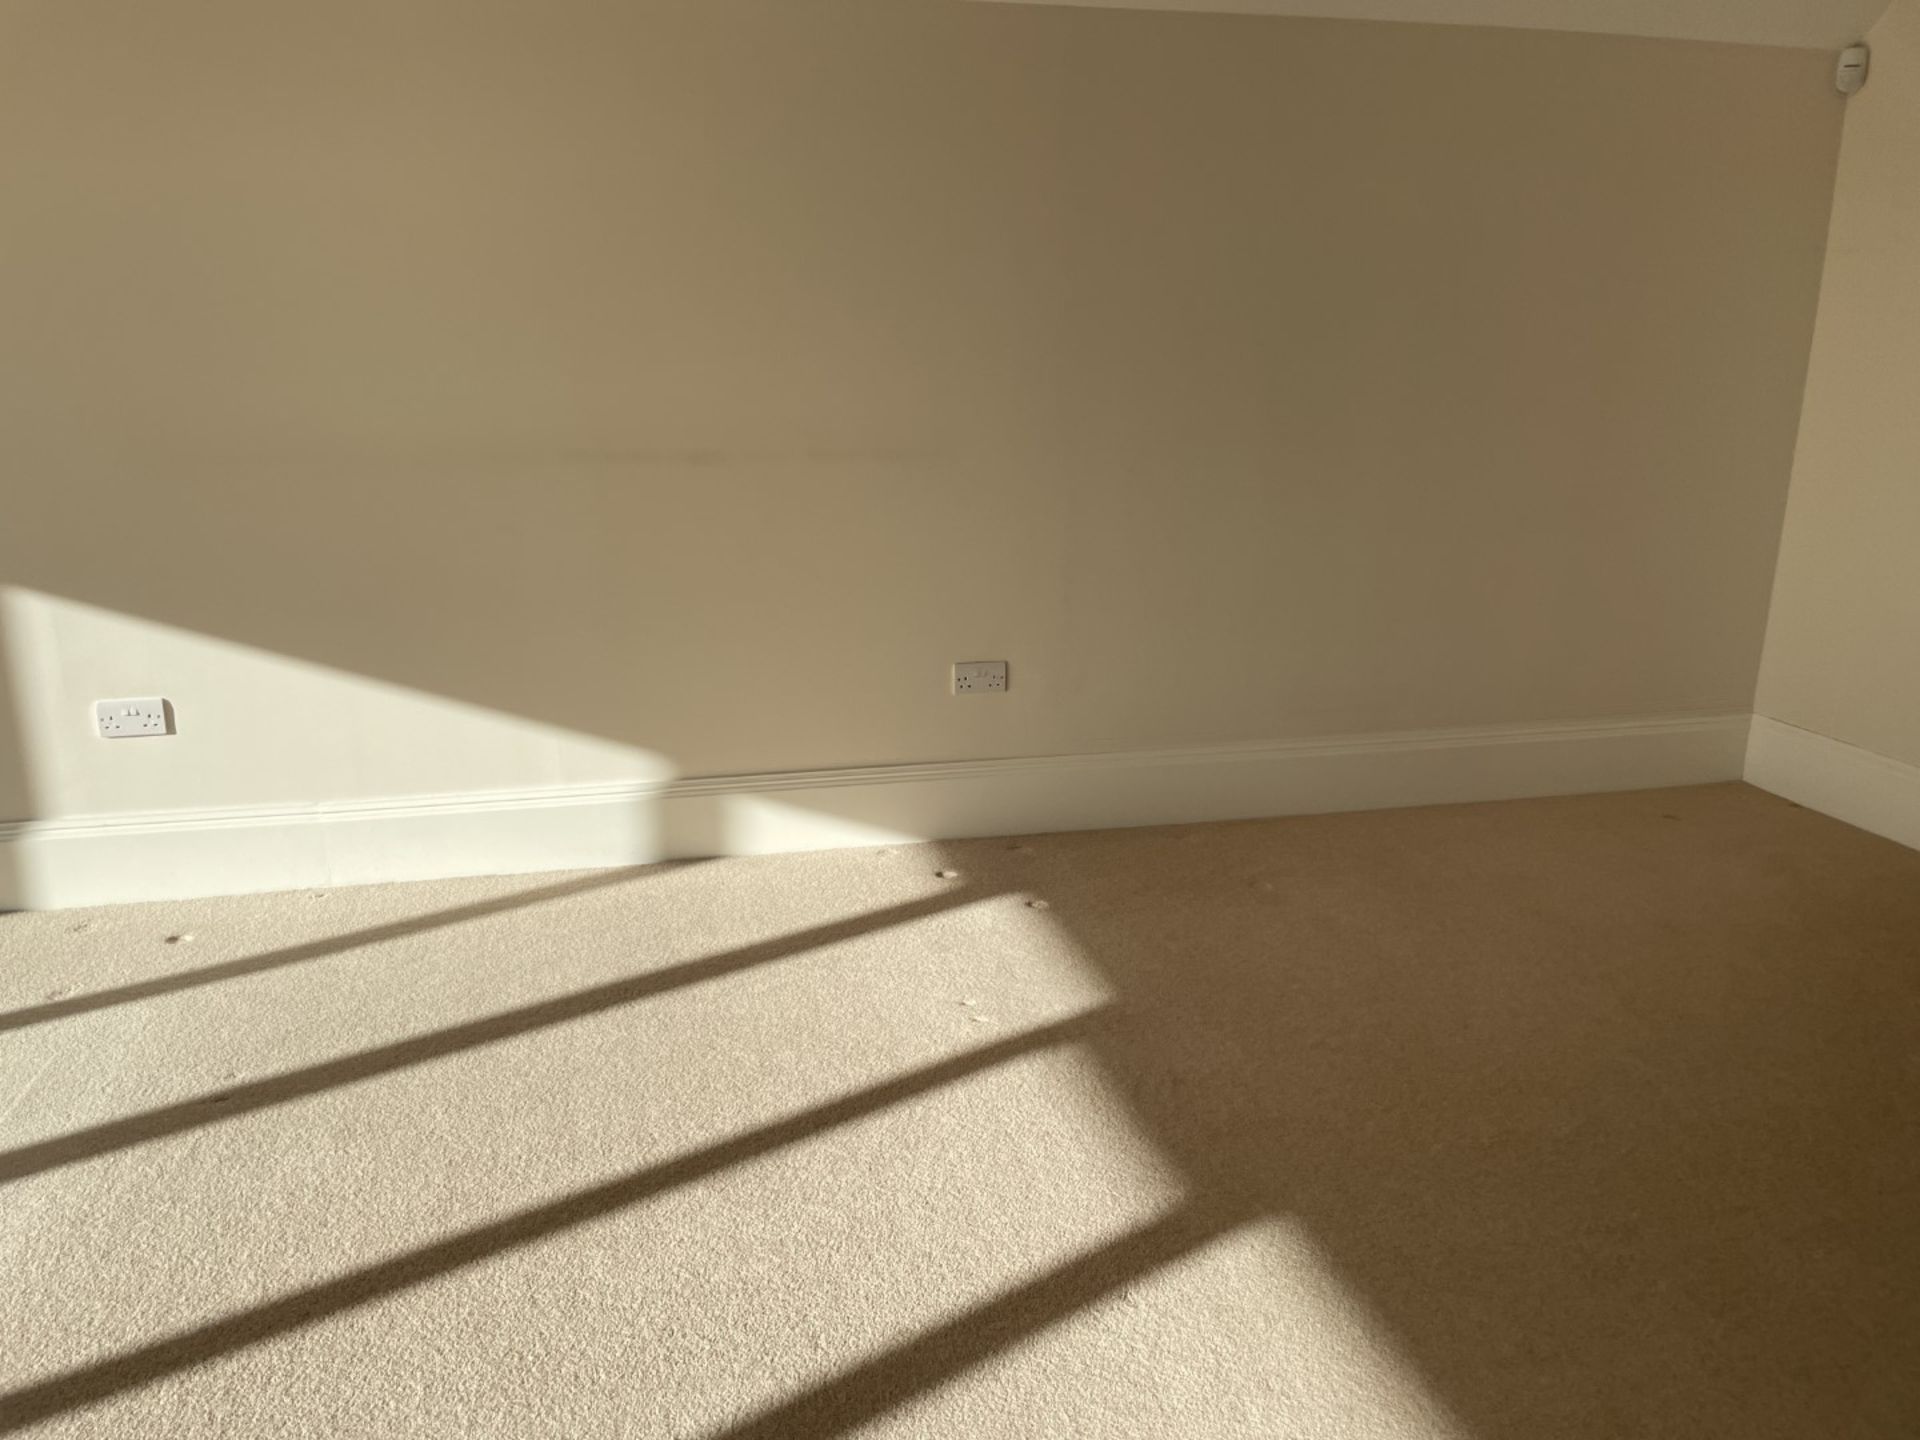 1 x Approximately 22-Metres of Painted Timber Wooden Skirting Boards, In White - Ref: PAN224 - CL896 - Image 2 of 10